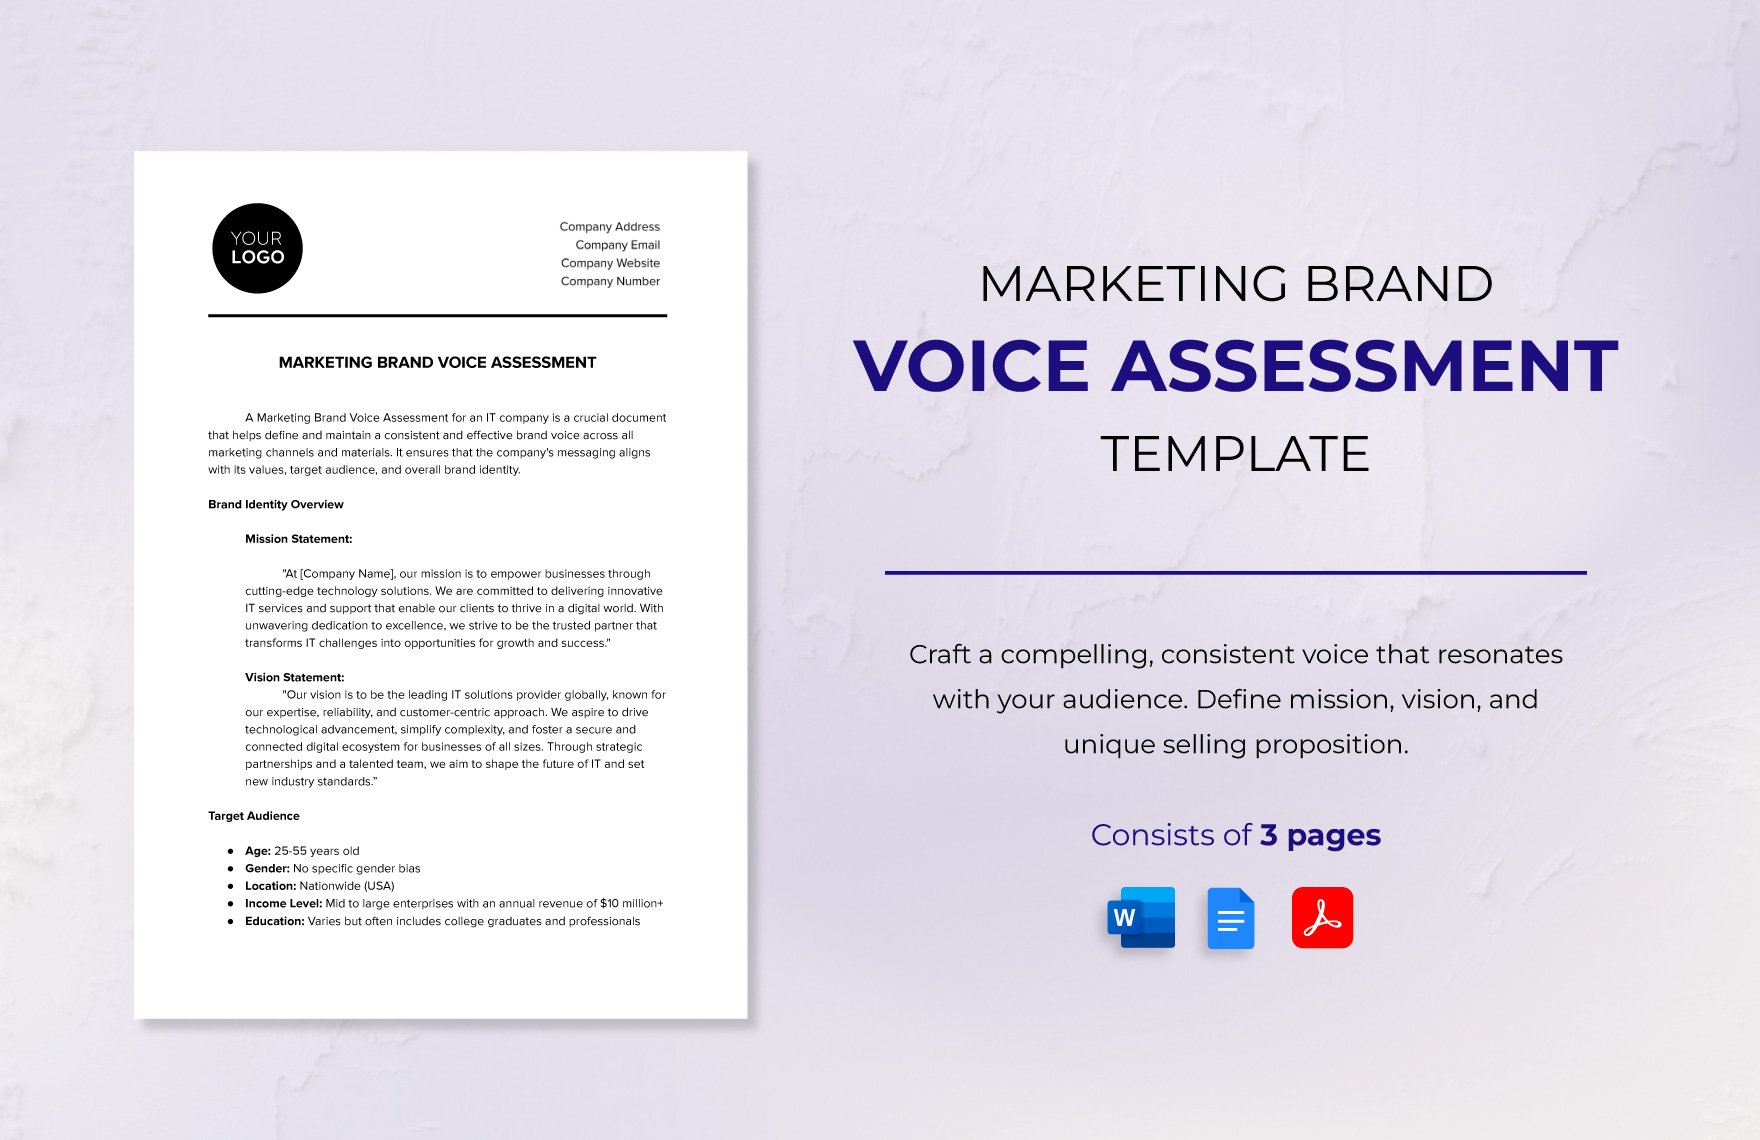 Marketing Brand Voice Assessment Template in Word, Google Docs, PDF